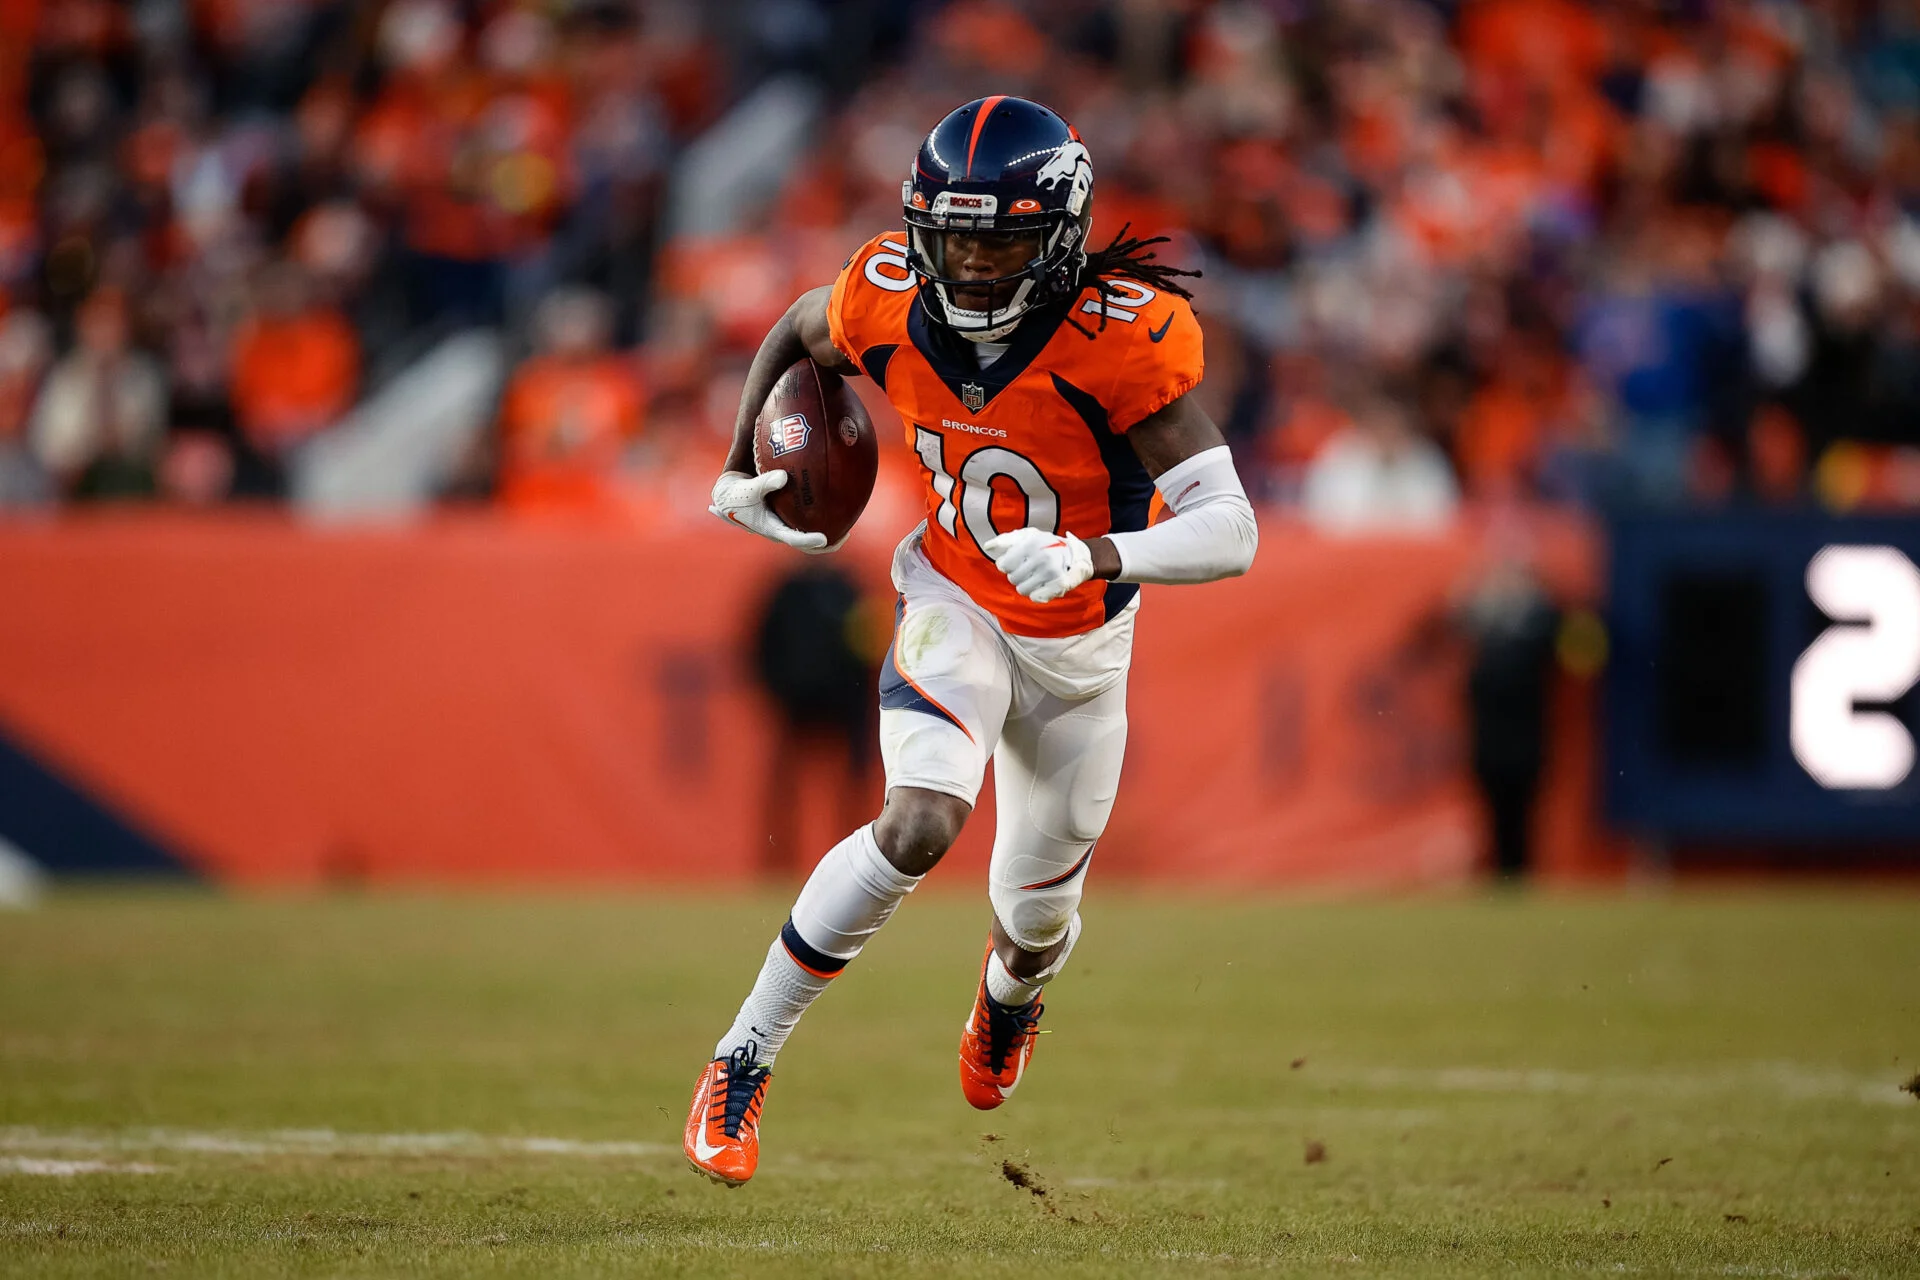 Broncos Shake-Up: The Inside Scoop on Jerry Jeudy's Move to the Browns